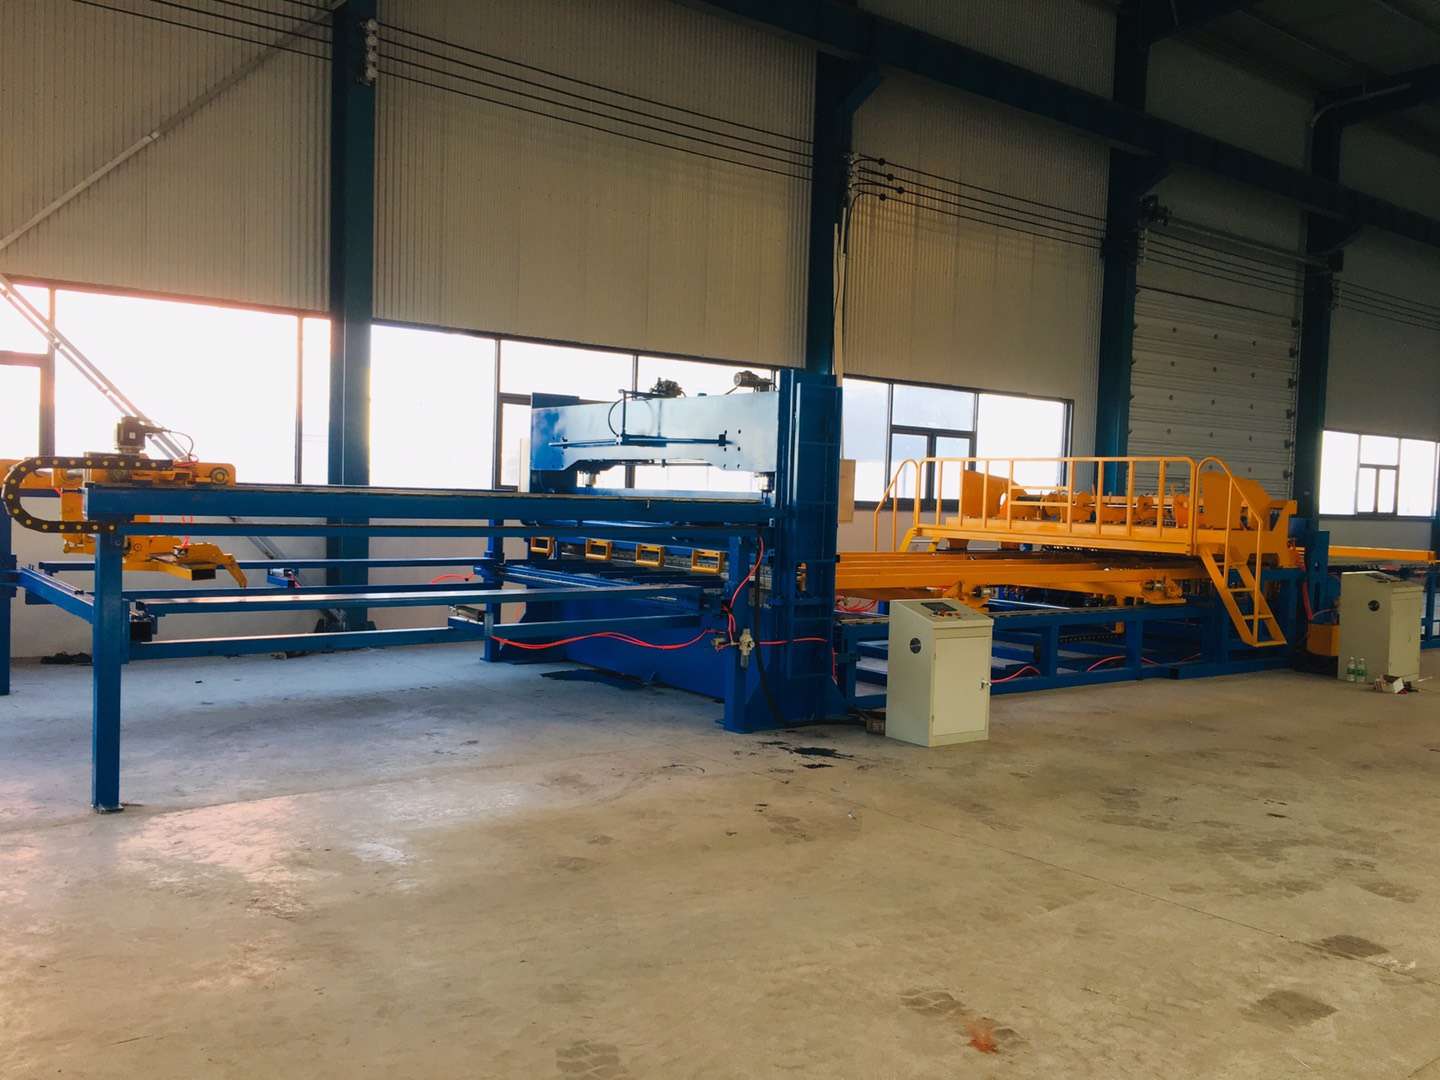 Low price Fully automatic fence panel production lineIntroduces the production equipment of fence panels